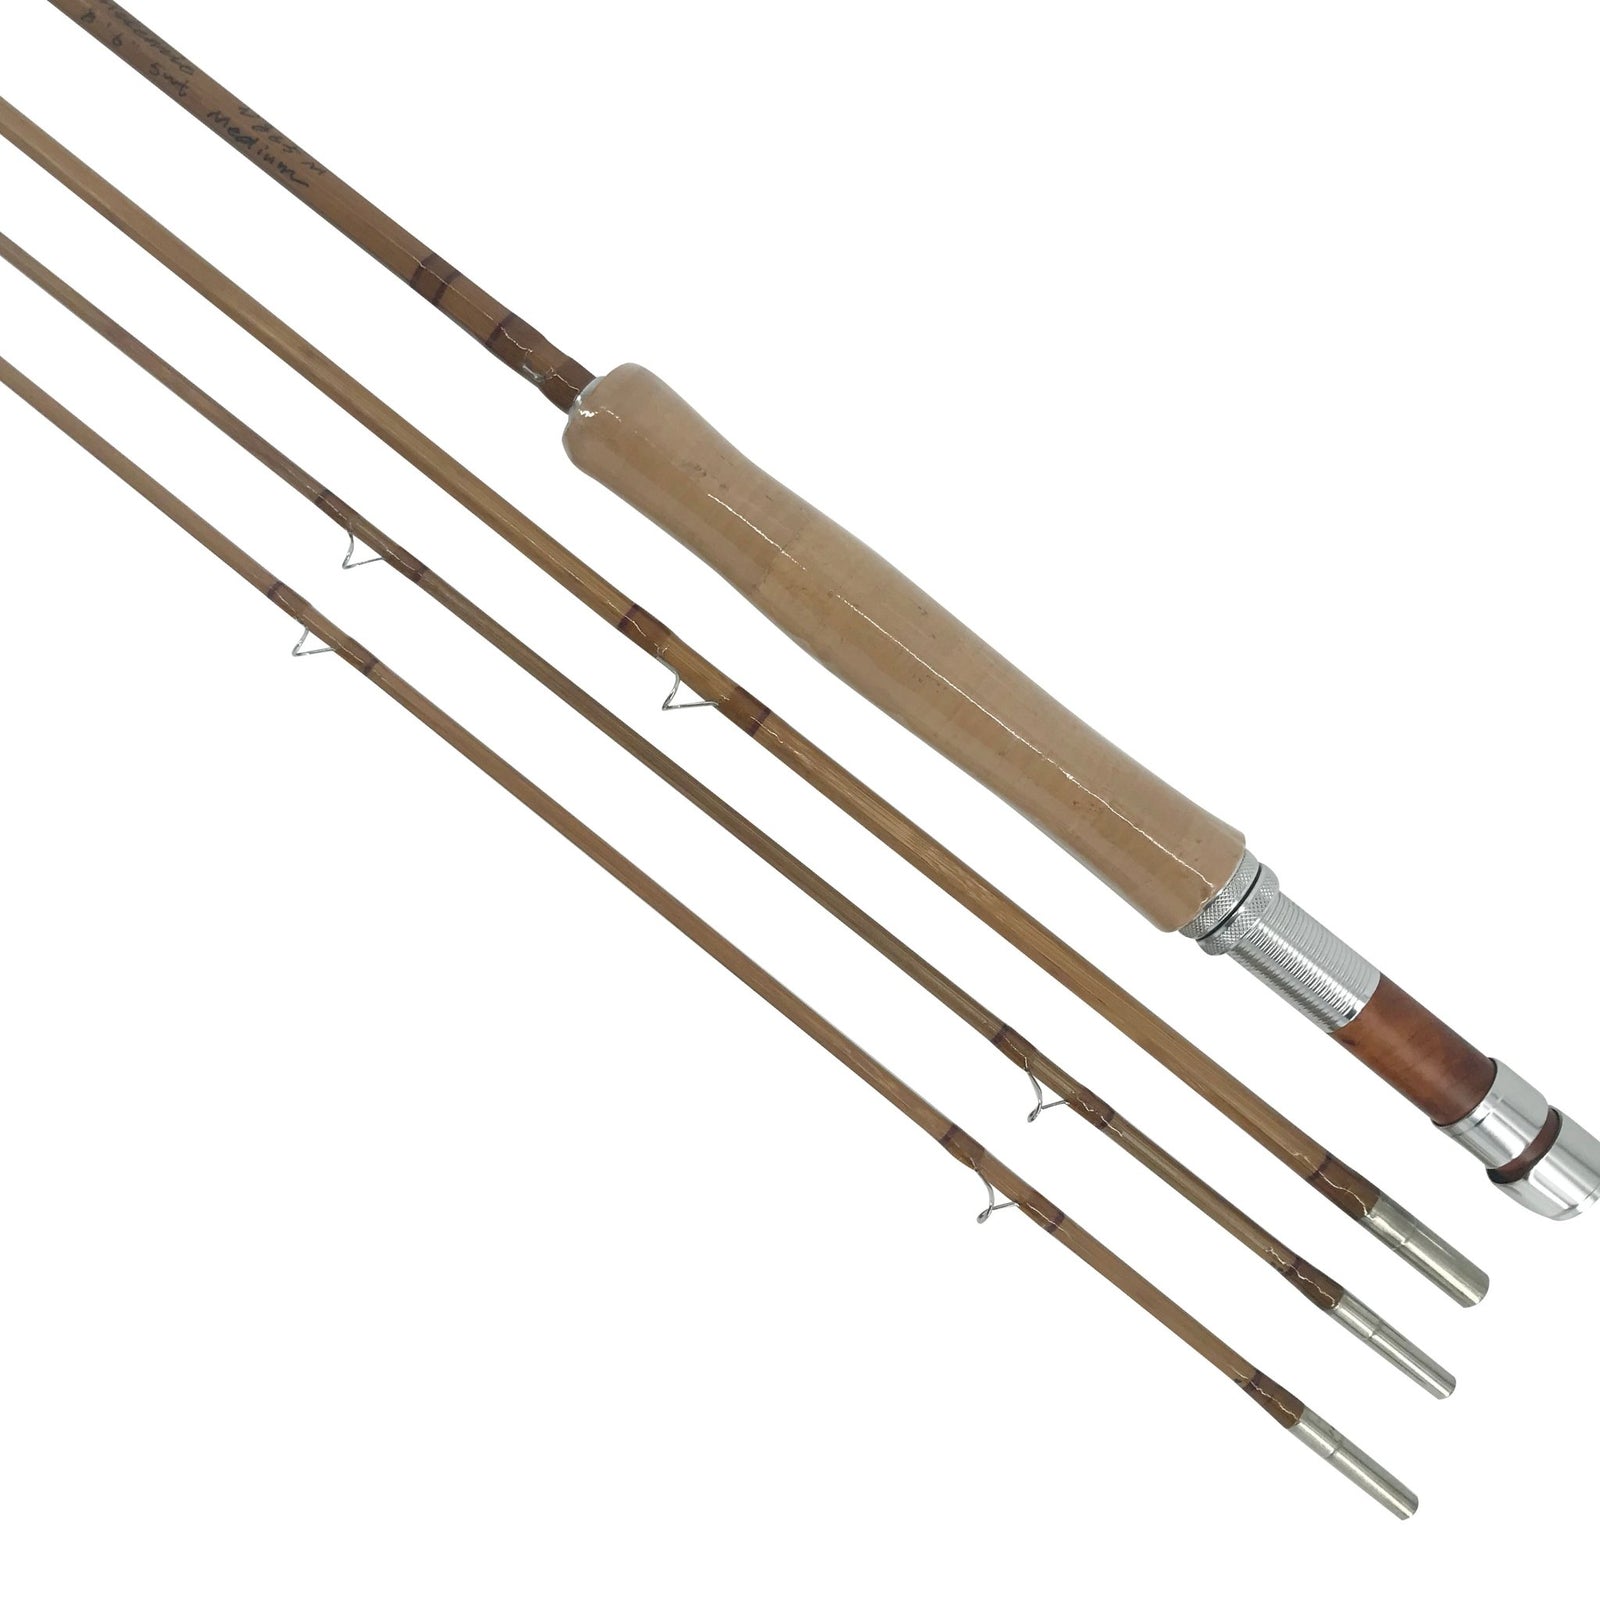 Victory Series Bamboo Fly Rods - Headwaters Bamboo